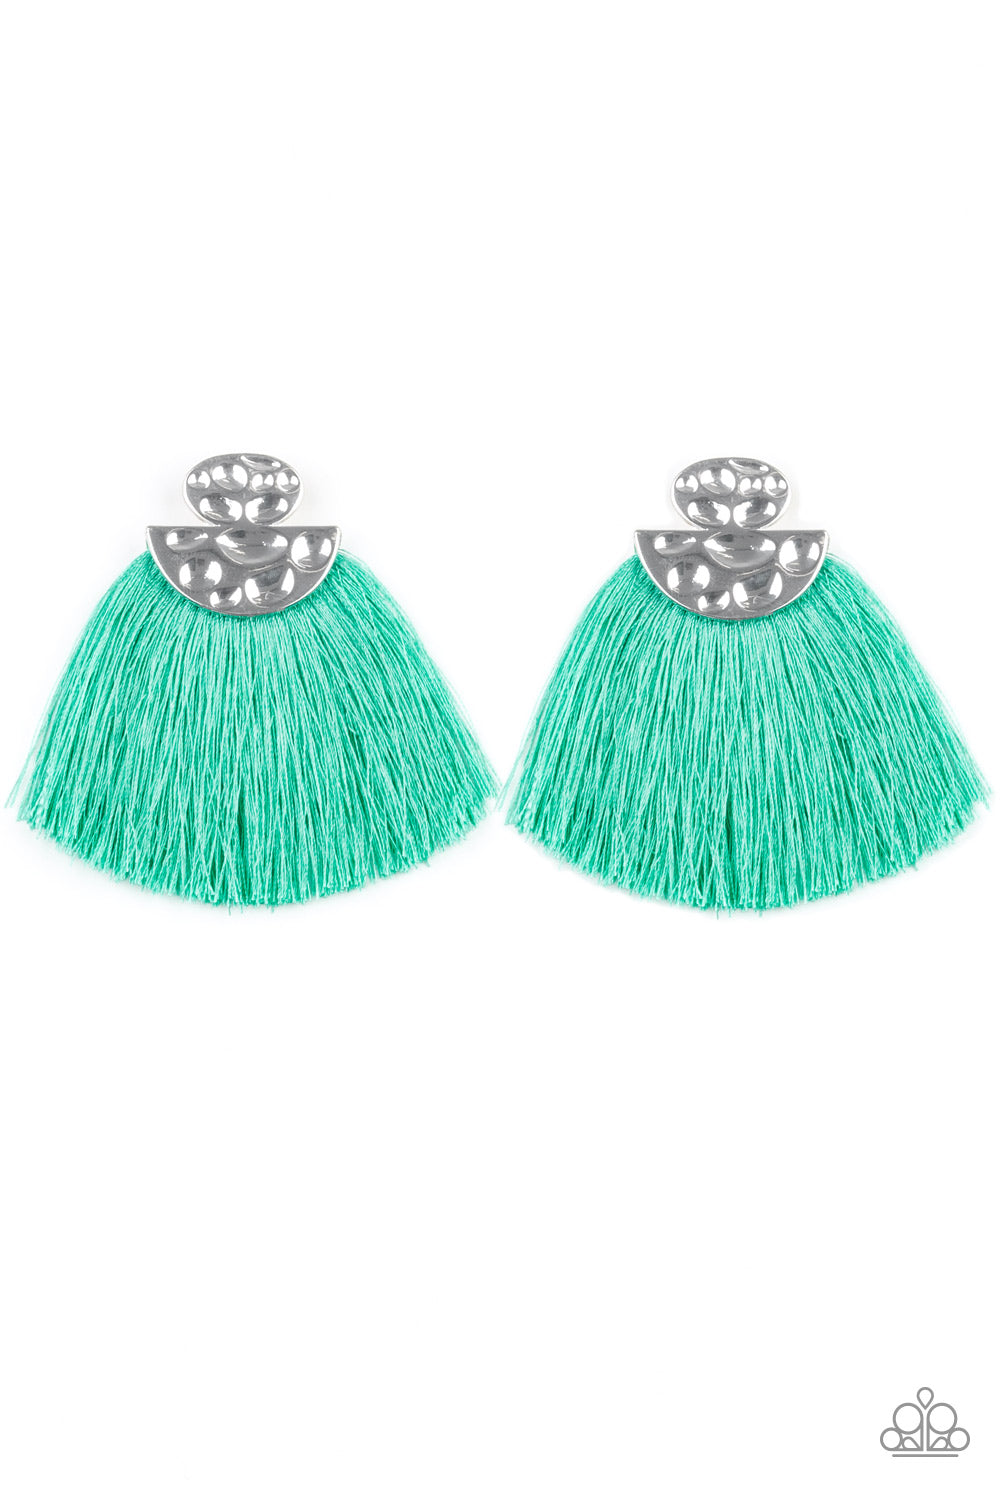 Paparazzi Accessories  - Make Some PLUME - #E56 Green Earring